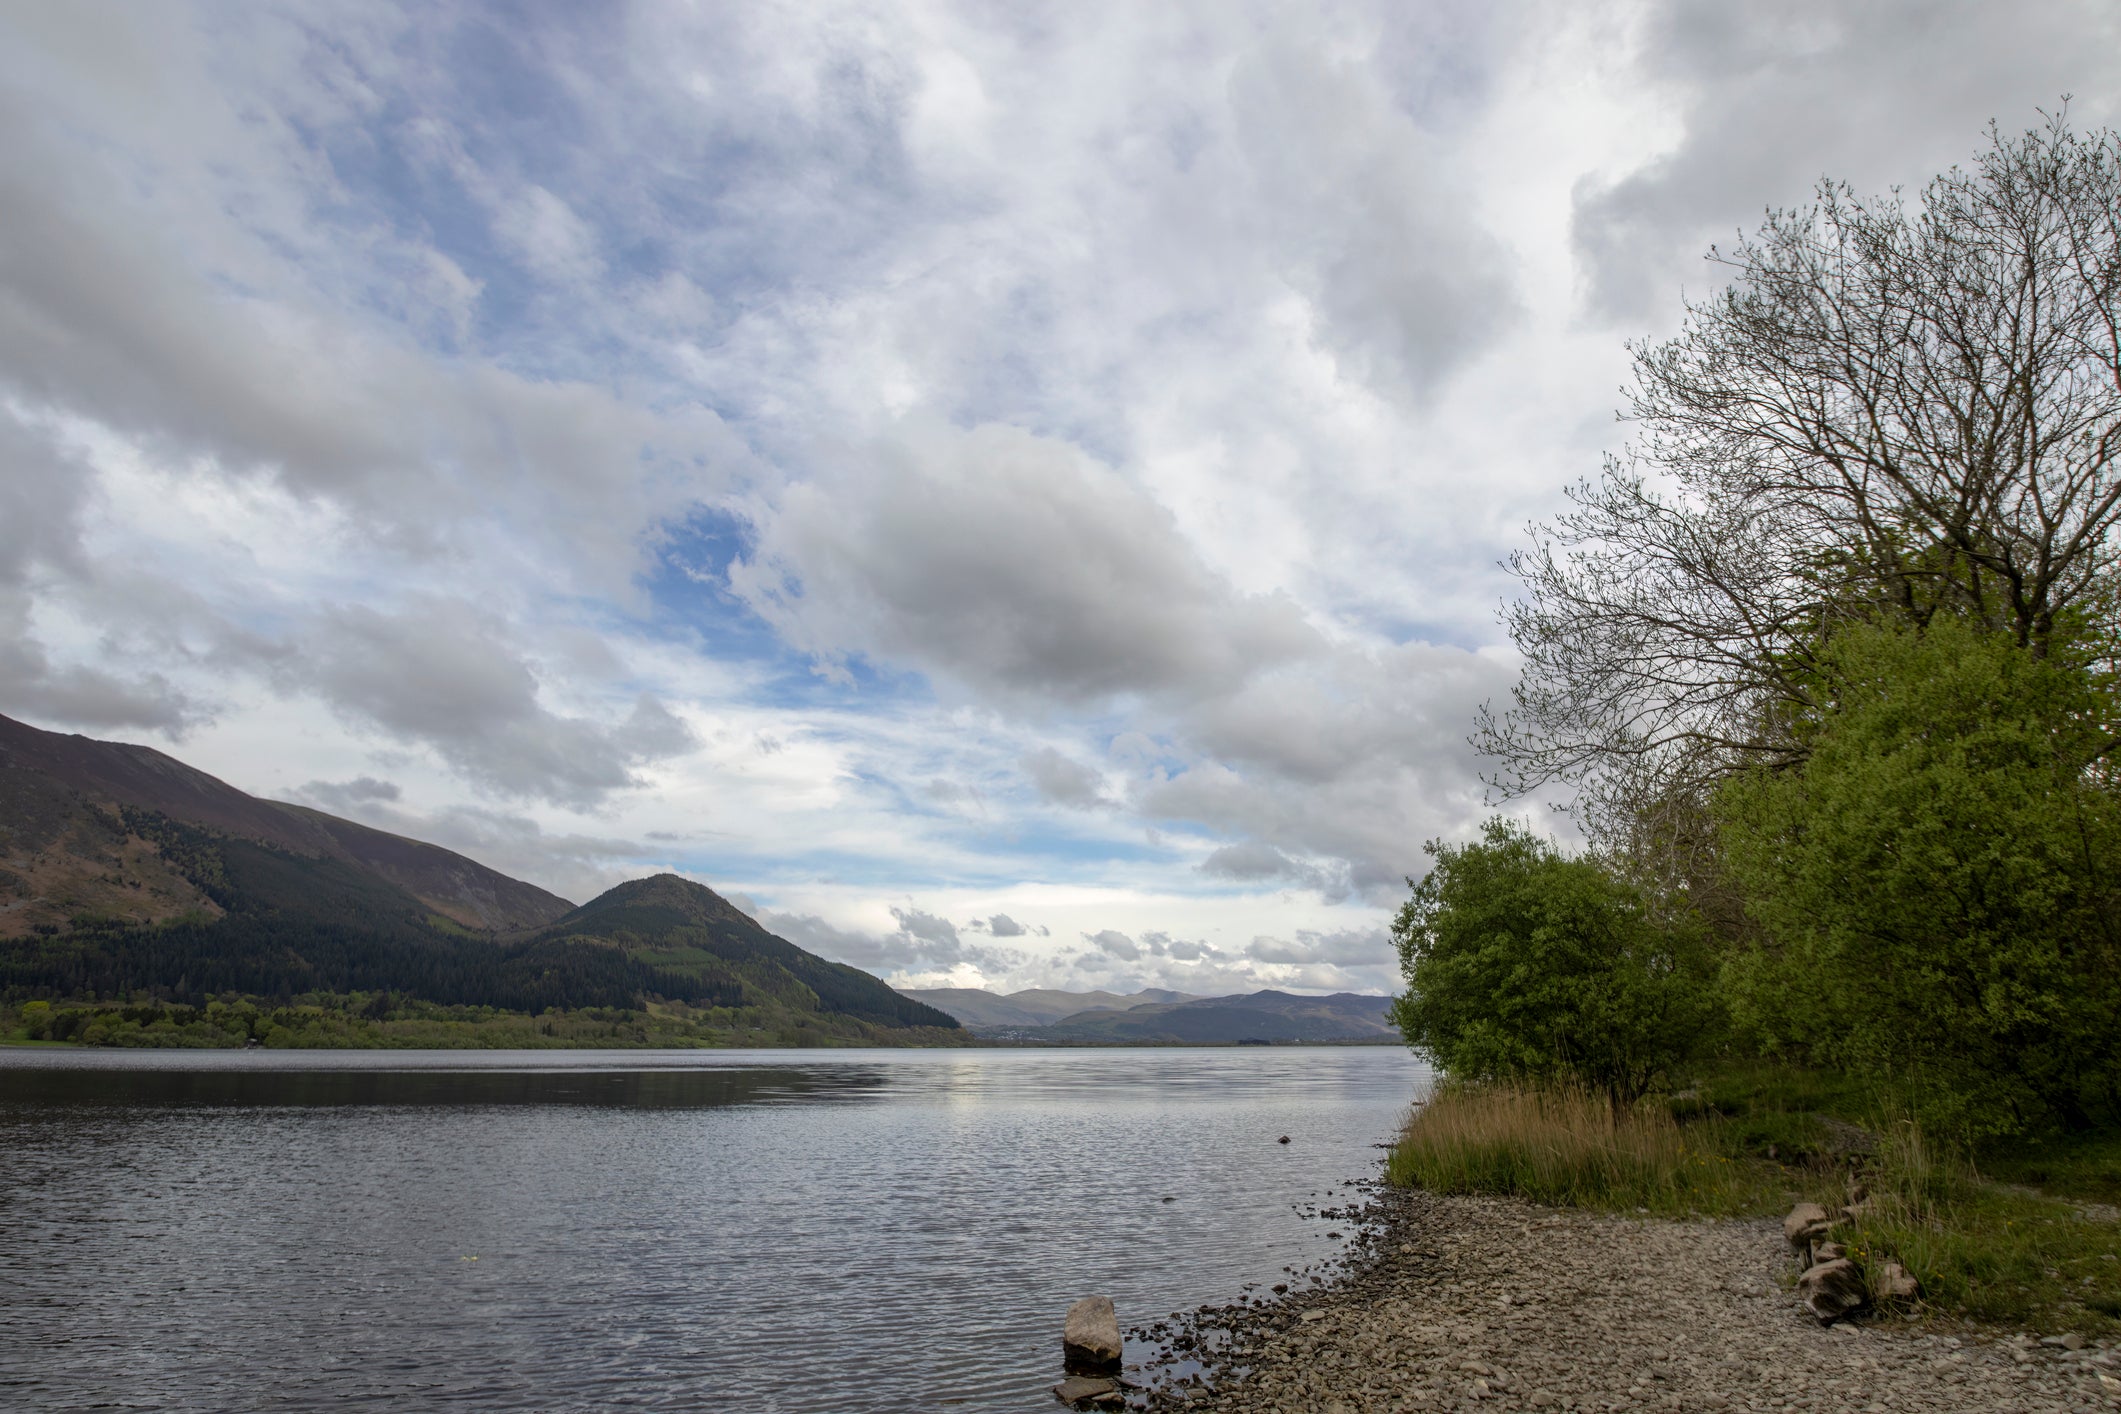 Bassenthwaite Lake in the Lake District is among the popular nature hubs hit by sewage overspills